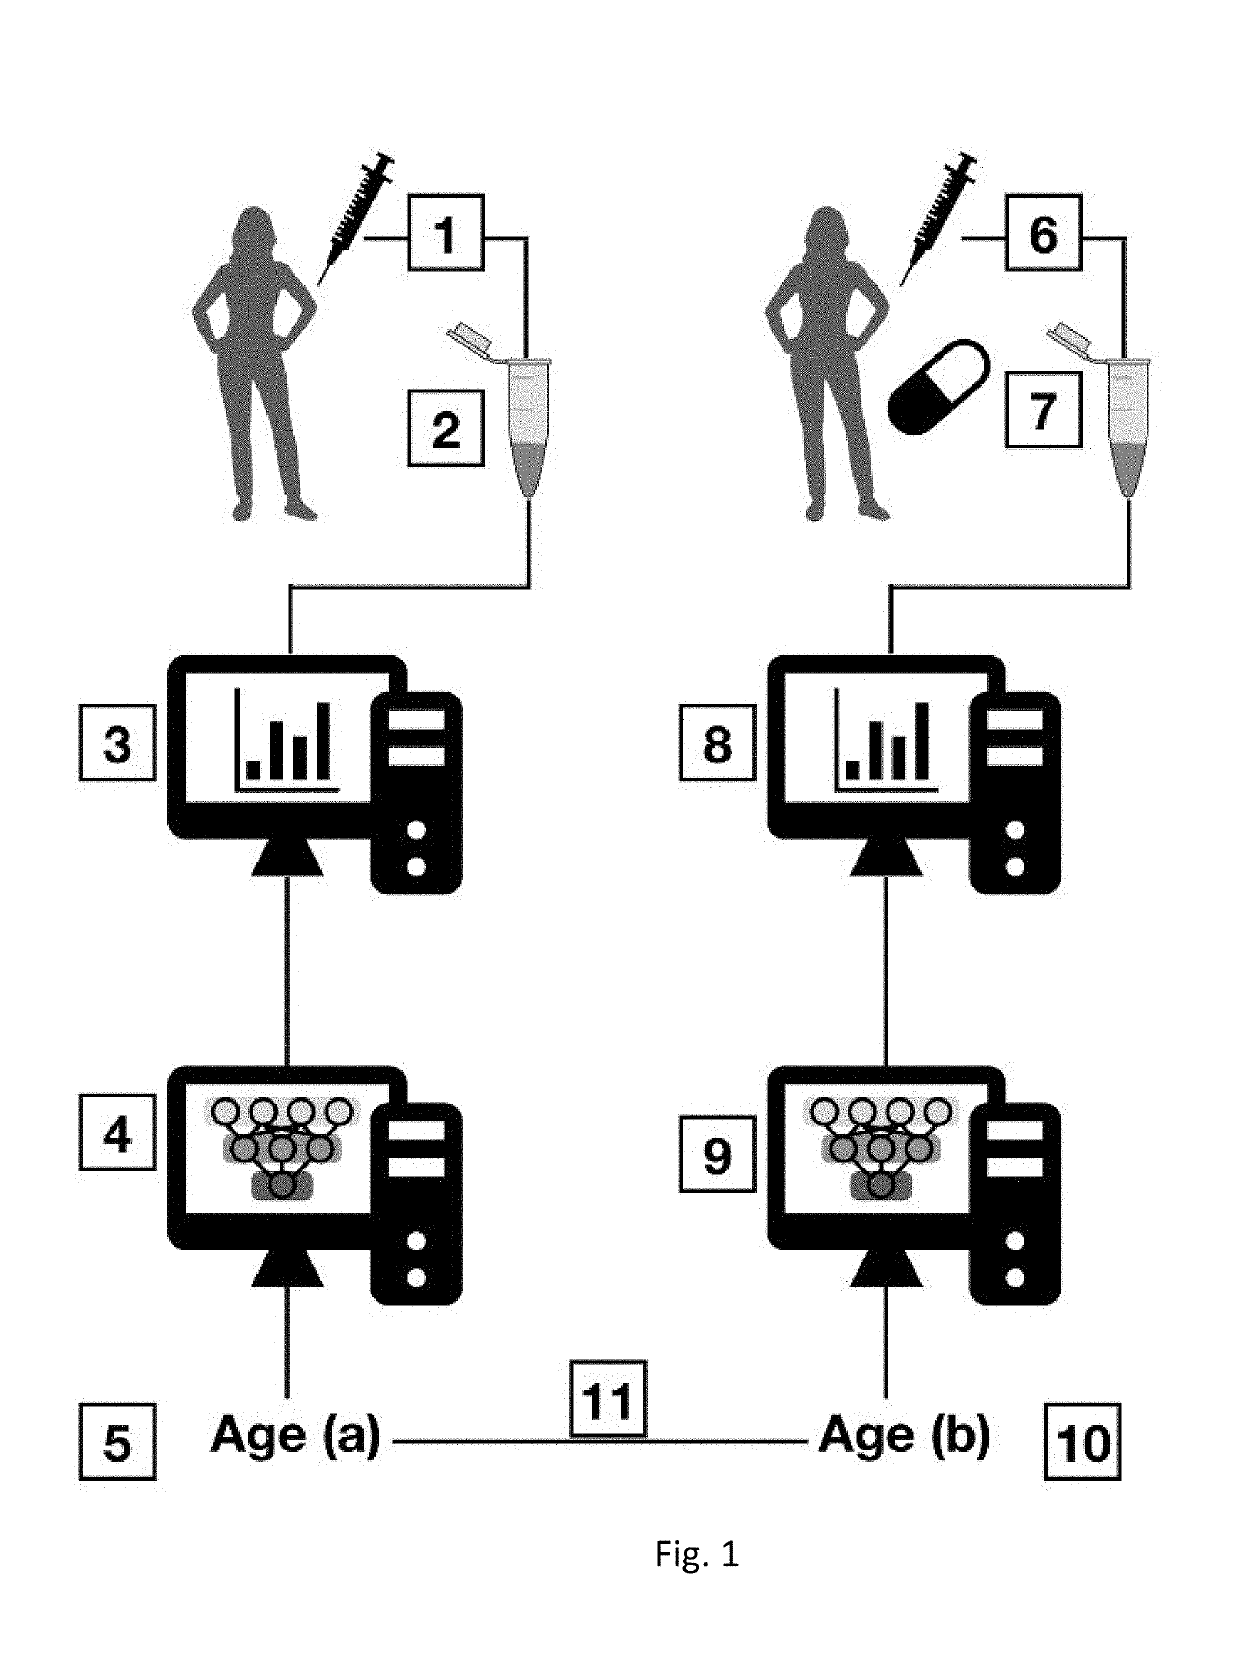 Deep transcriptomic markers of human biological aging and methods of determining a biological aging clock